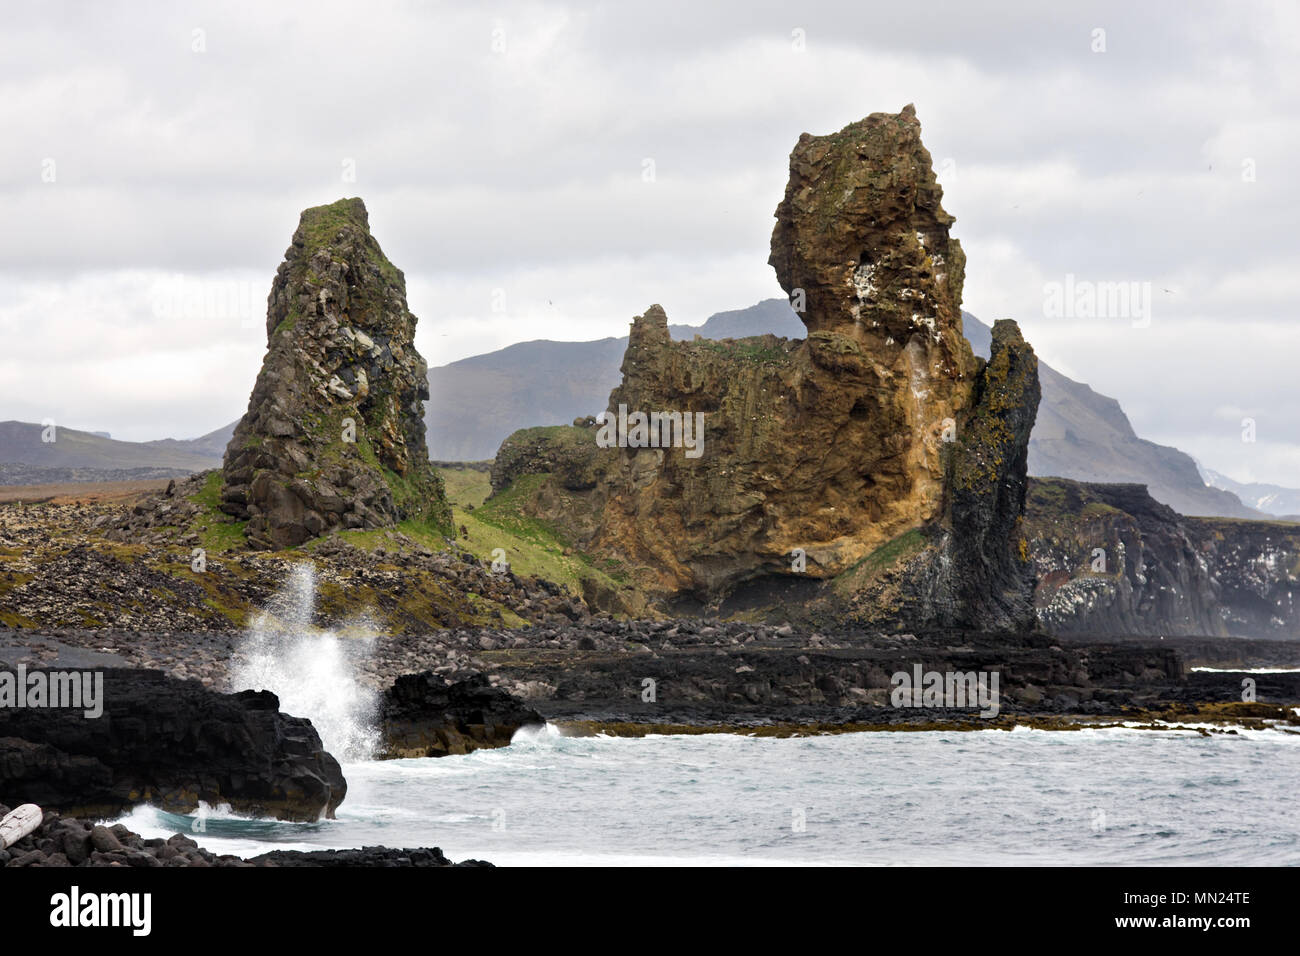 These volcanic rocks are located on the south side of the Snaefellsnes peninsula in Iceland and are up to 70m tall. Stock Photo